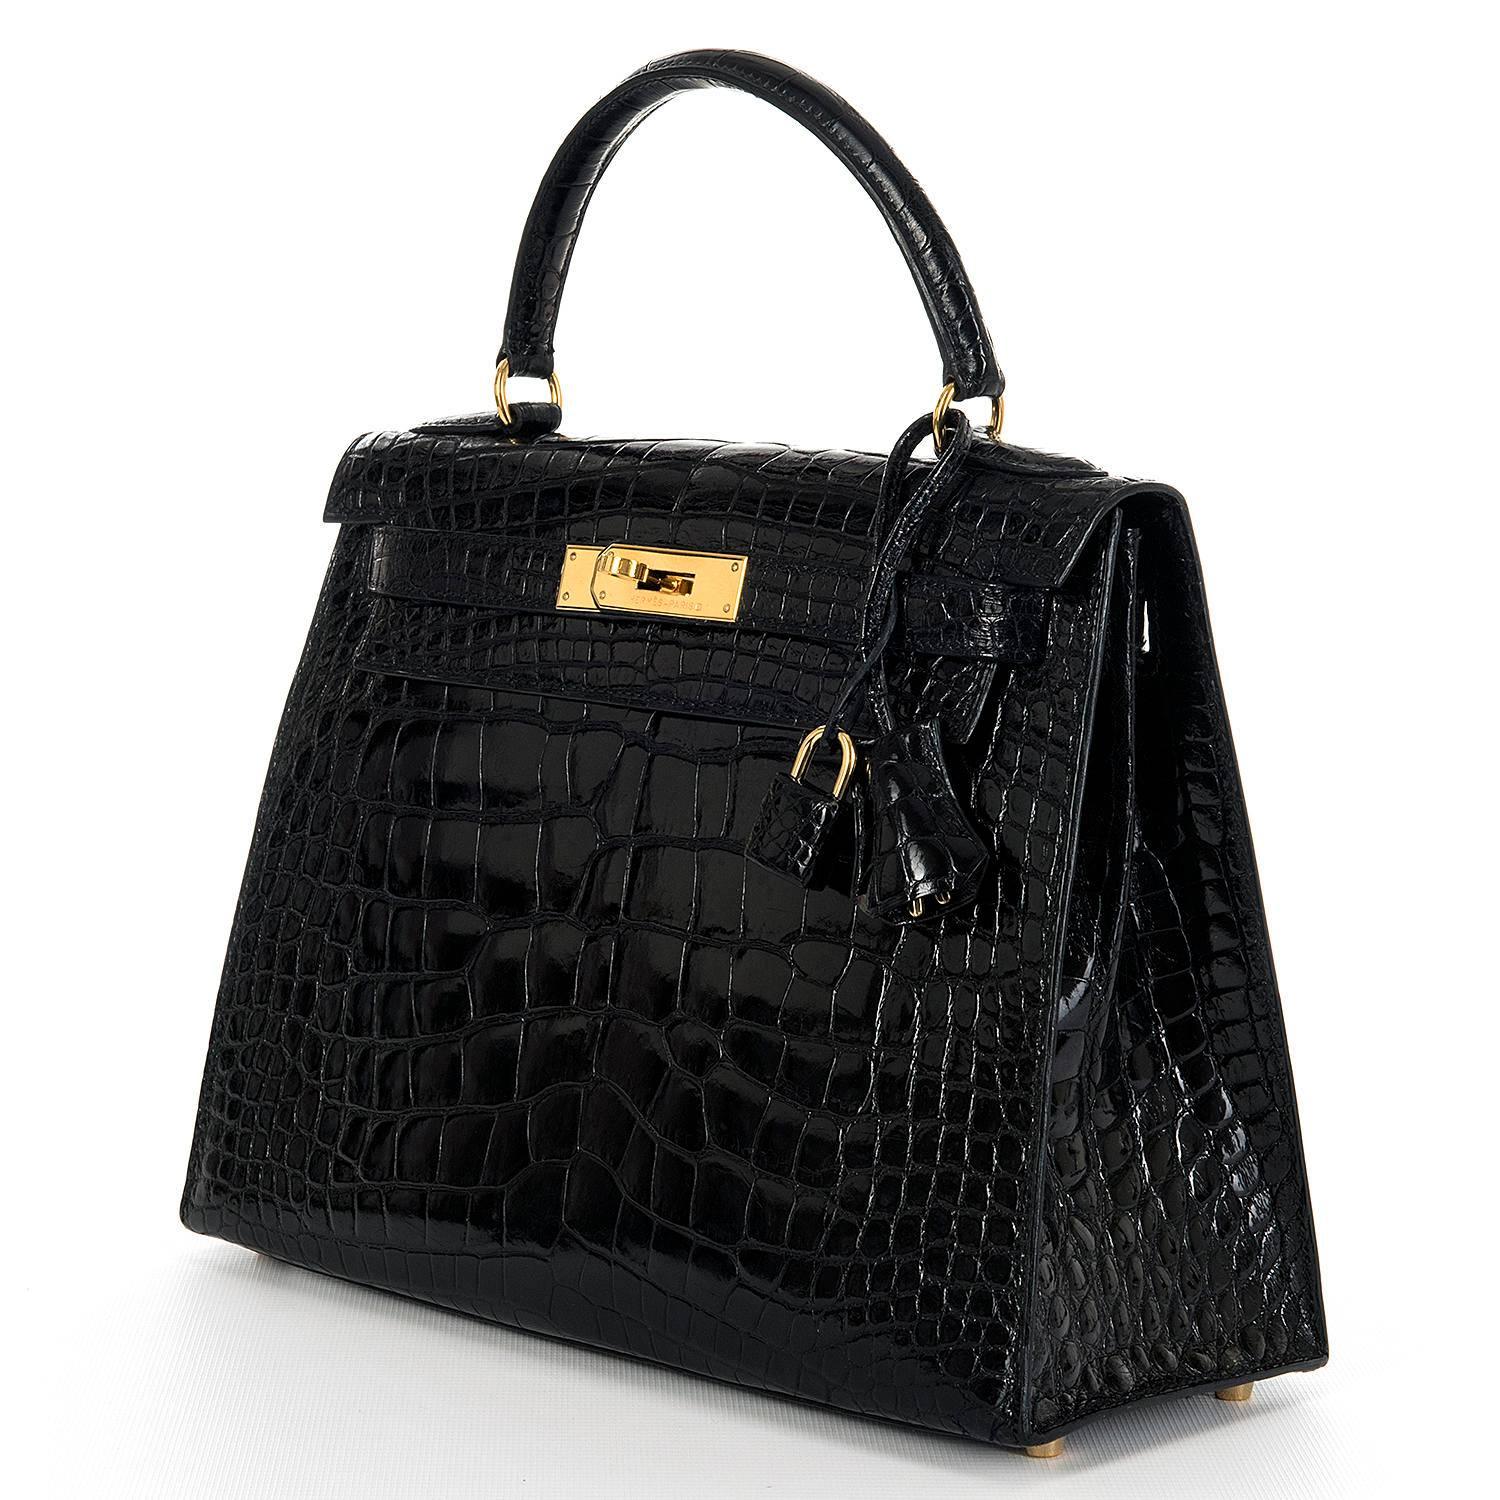 So So Rare !! A Hermes Shiny Black Alligator Kelly 28cm Bag with it's matching Hermes 'H' Bearn Wallet. Both pieces are in absolutely pristine condition throughout and were sourced from a private collection in Monte Carlo. Both pieces were